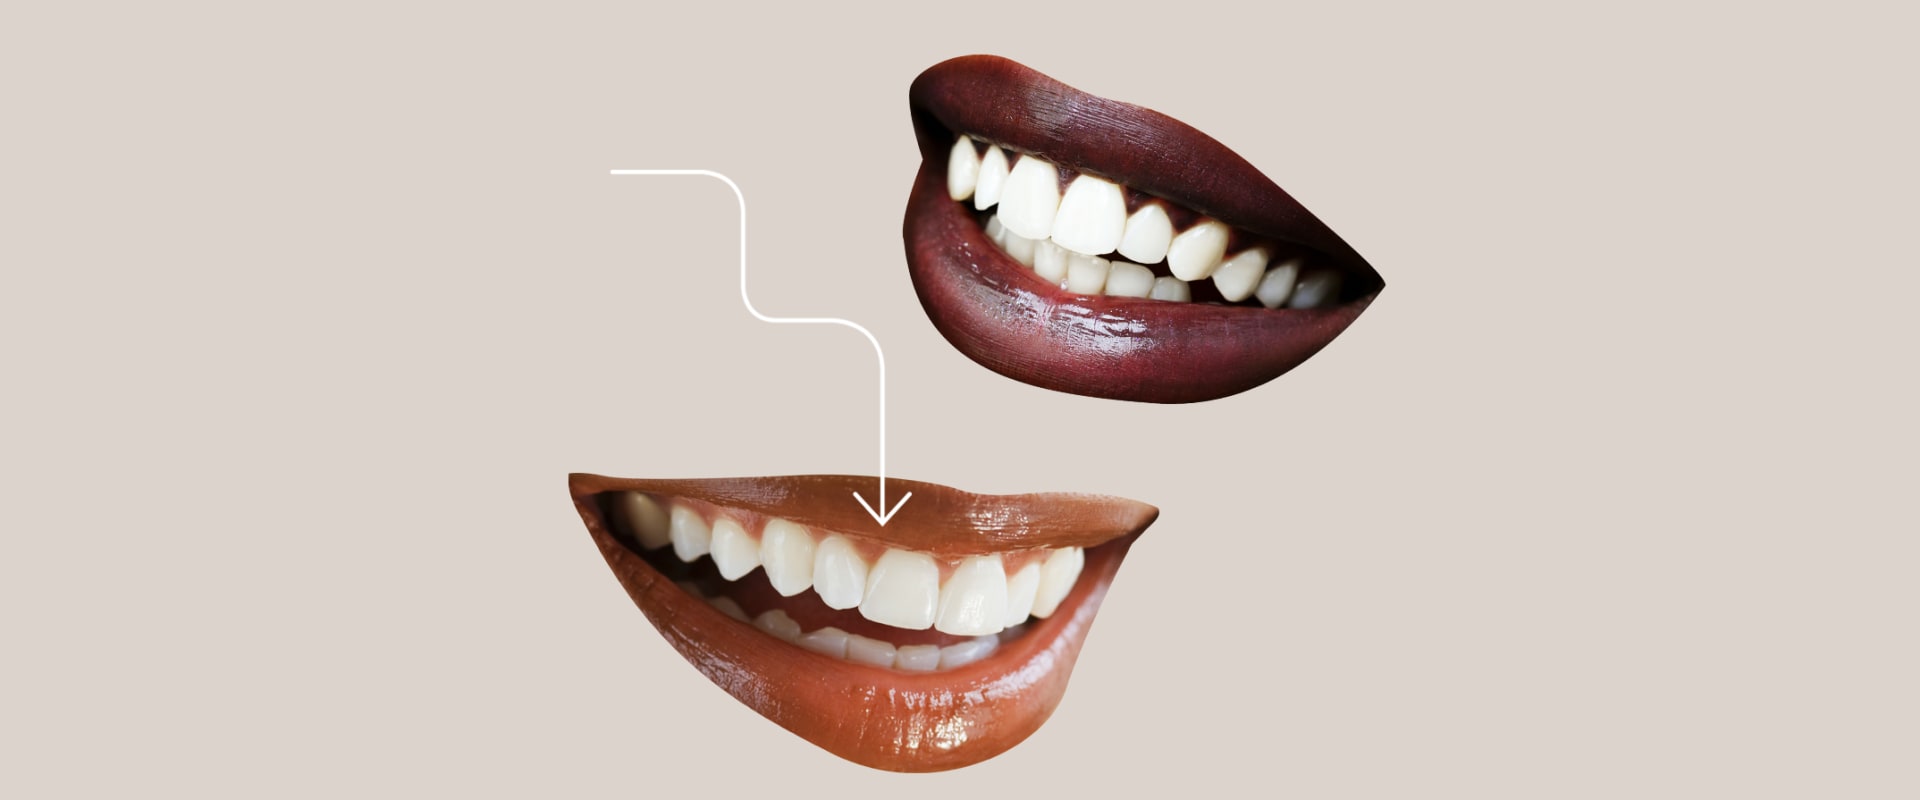 Veneers Cost Breakdowns: An Overview of Alternatives to Professional Teeth Whitening Treatments